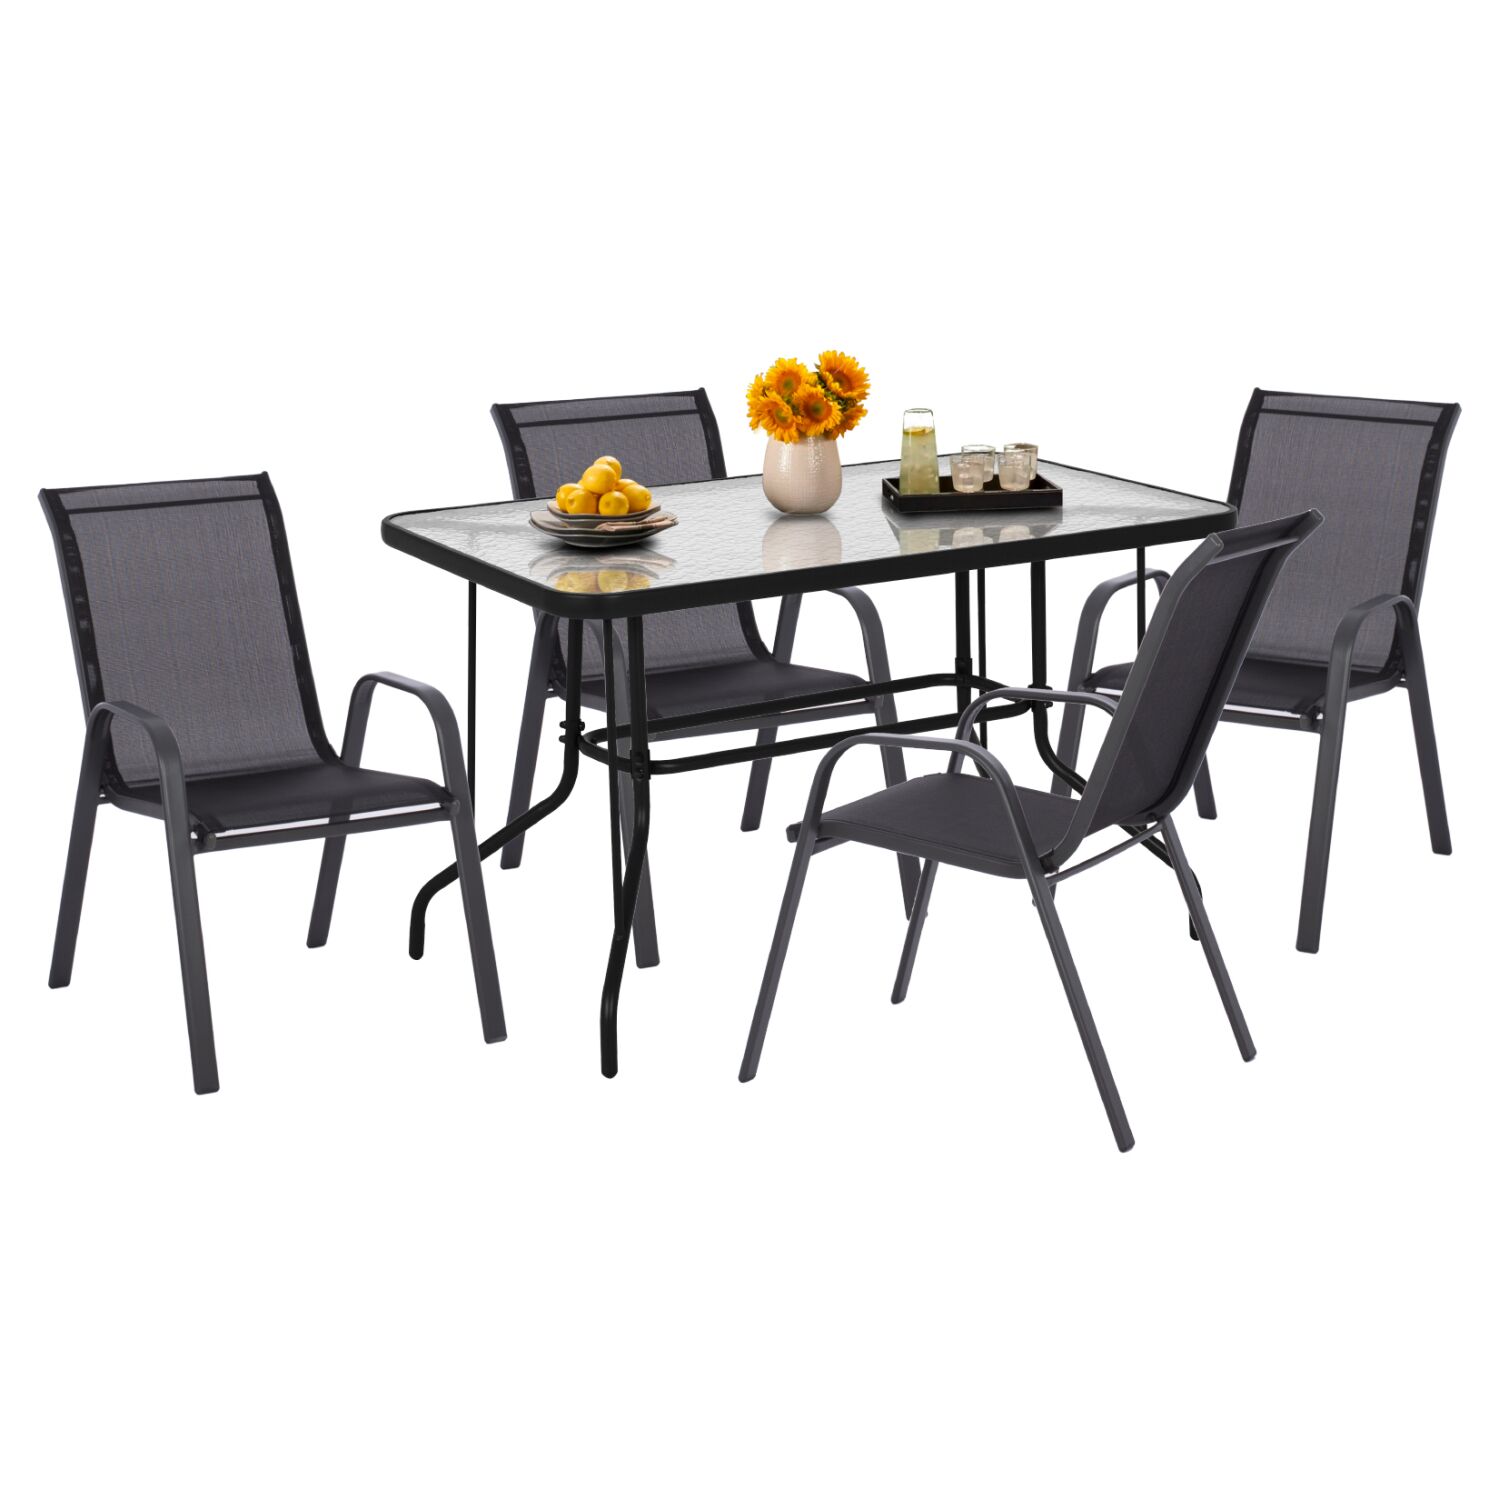 OUTDOOR DINING SET HM5193.03 5PCS METAL IN GREY COLOR